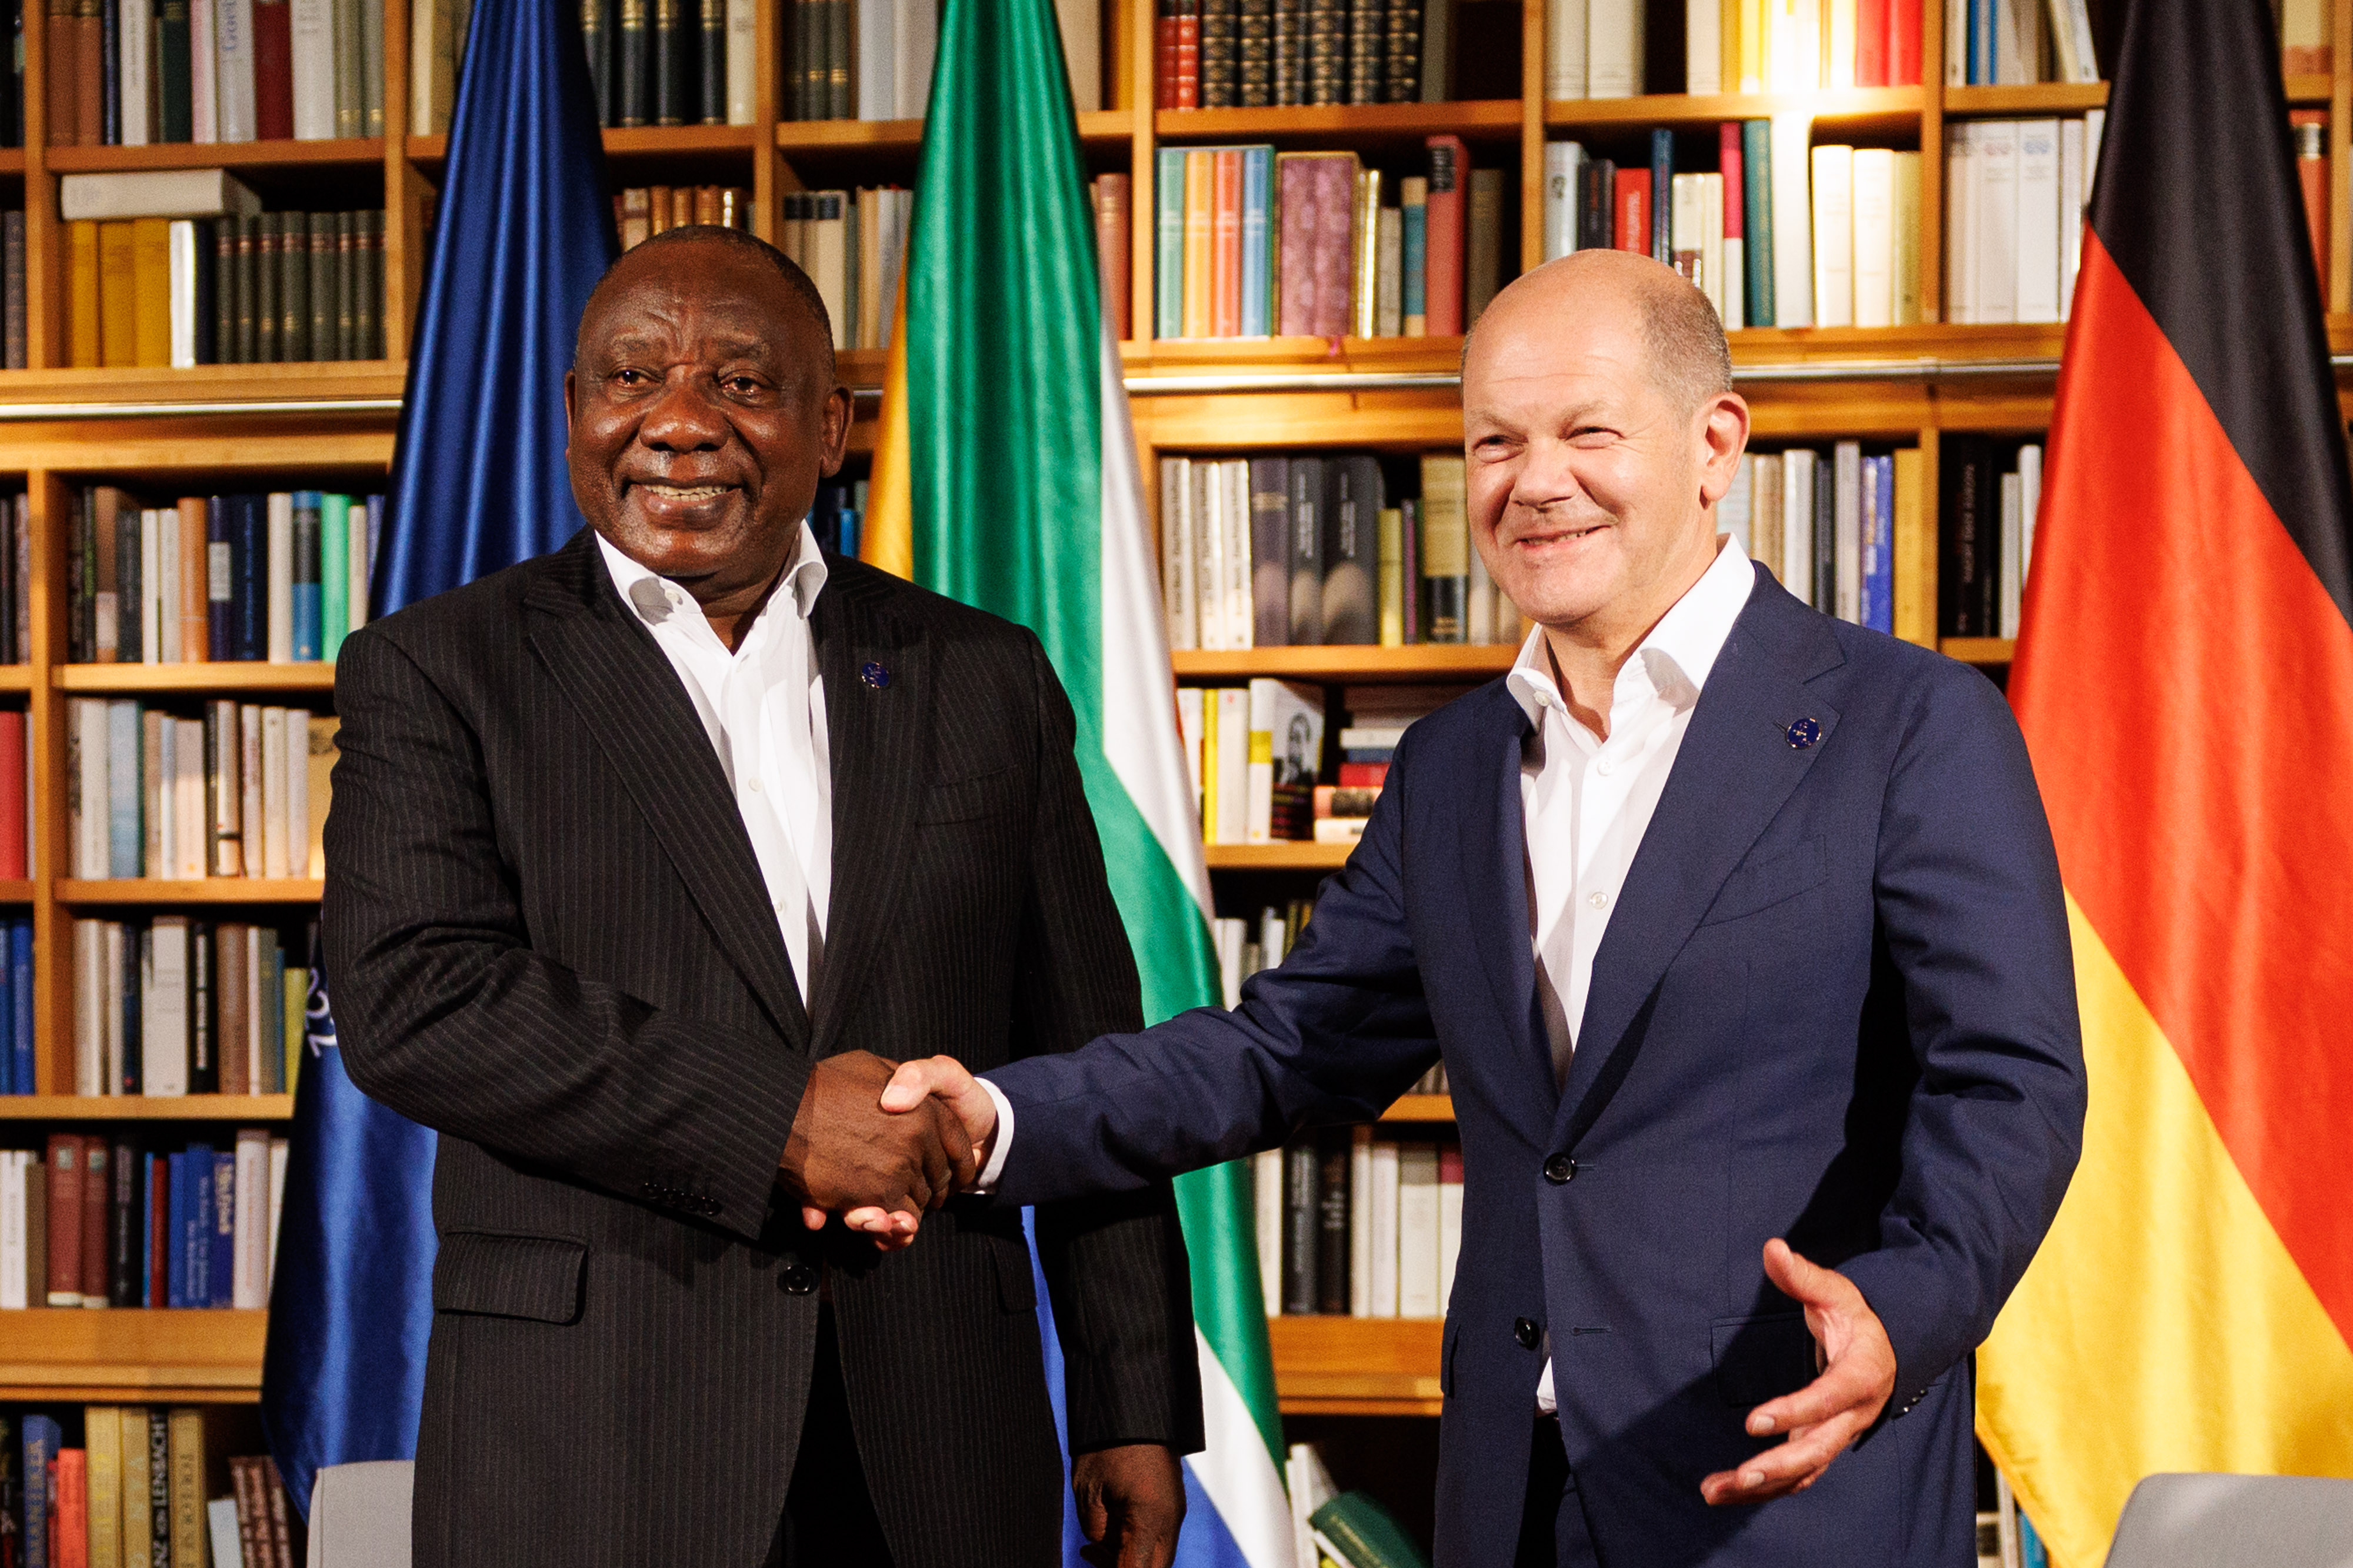 Bilateral meeting between Federal Chancellor Olaf Scholz and President Cyril Ramaphosa of South Africa in Schloss Elmau.